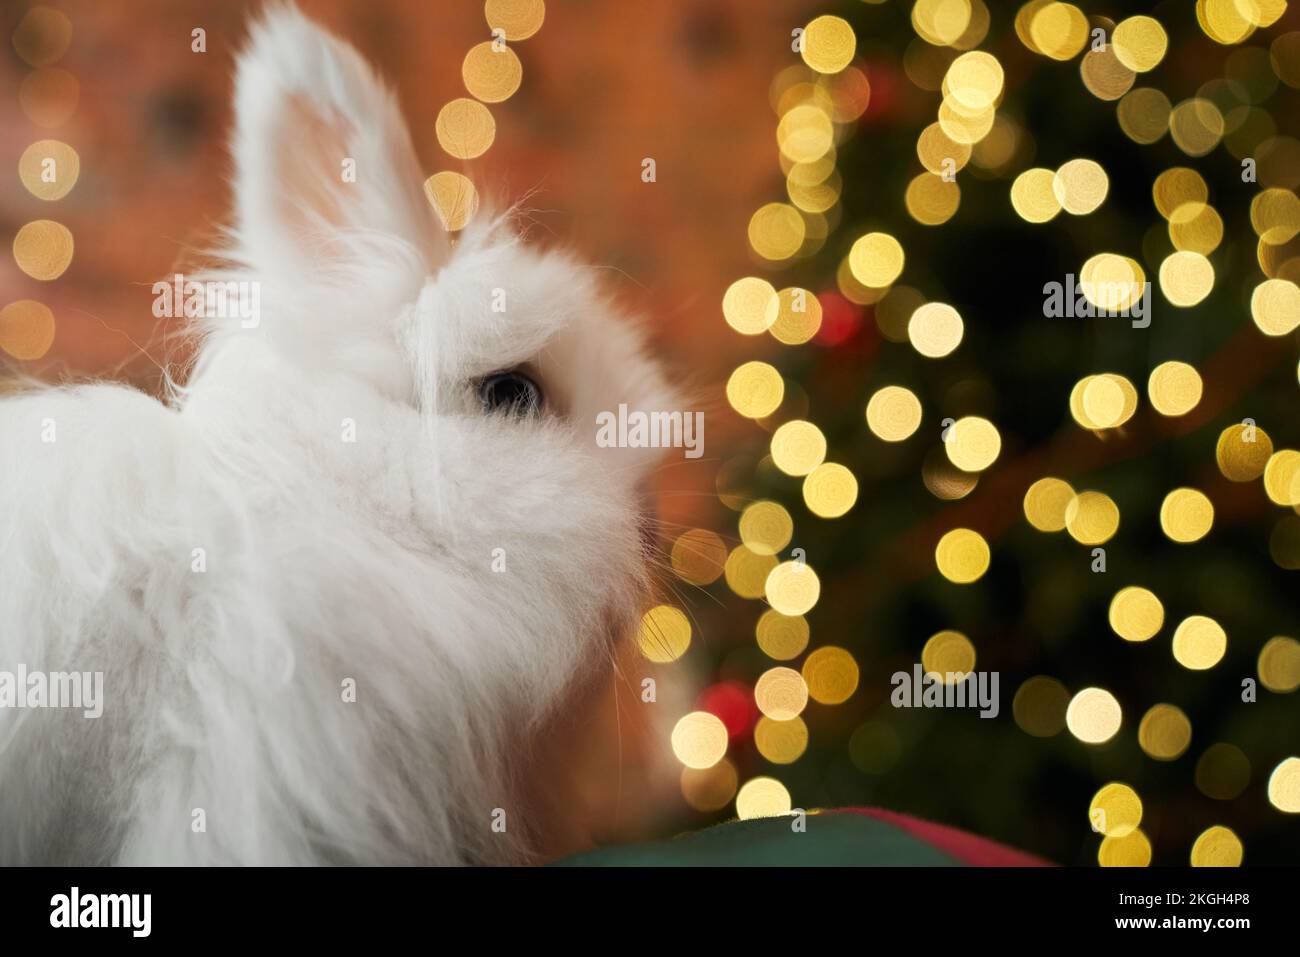 Side view of white rabbit sitting, looking at christmas tree decorated with garlands. Animal, symbol of new year posing in decorated room. Concept of Stock Photo